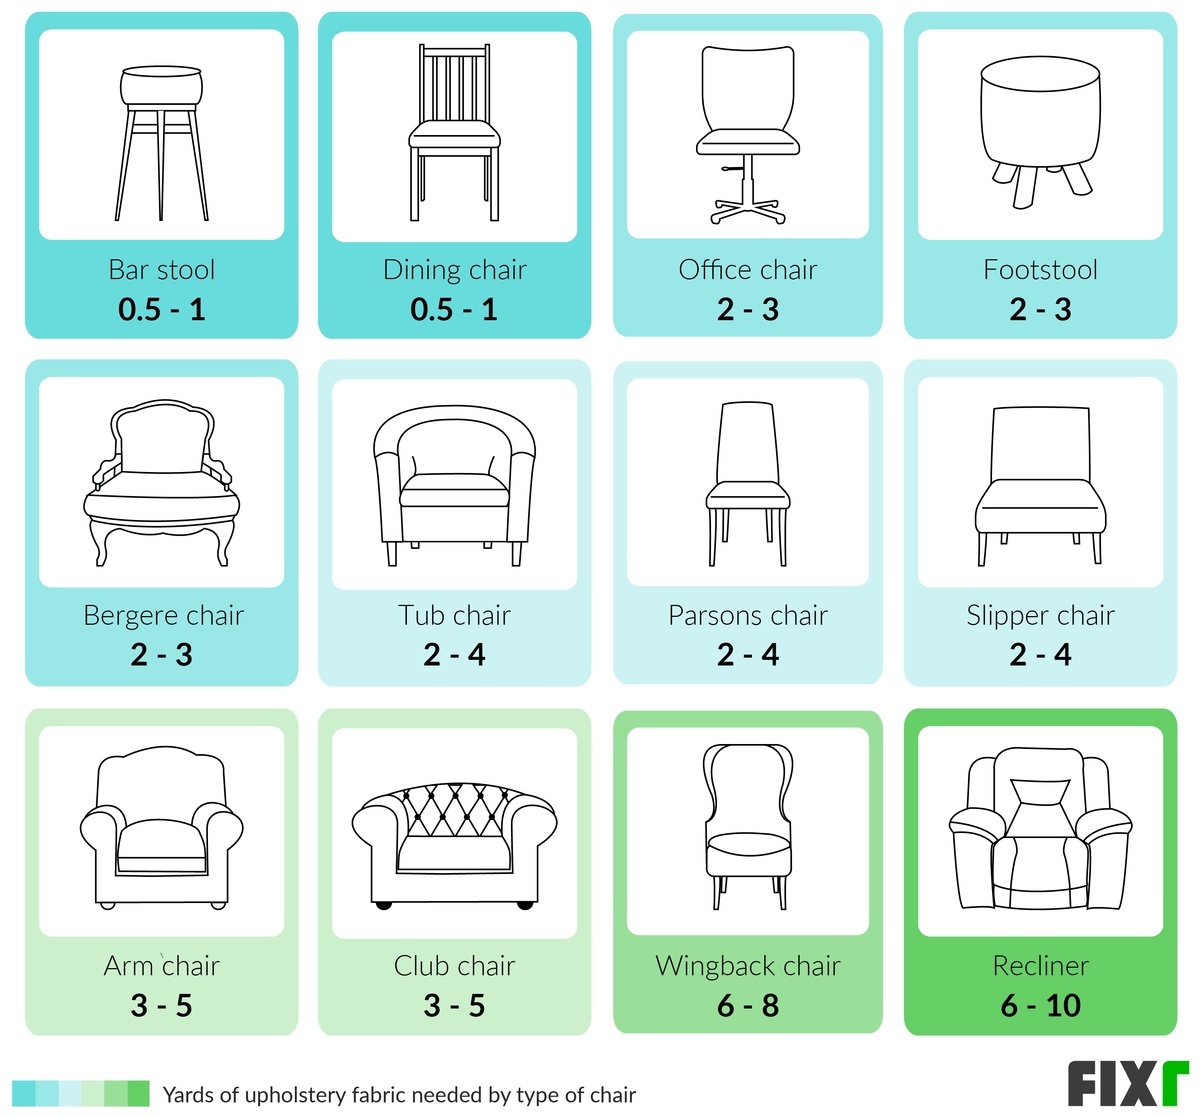 2021 Cost To Reupholster A Chair, How Much Does It Cost To Recover A Dining Chair